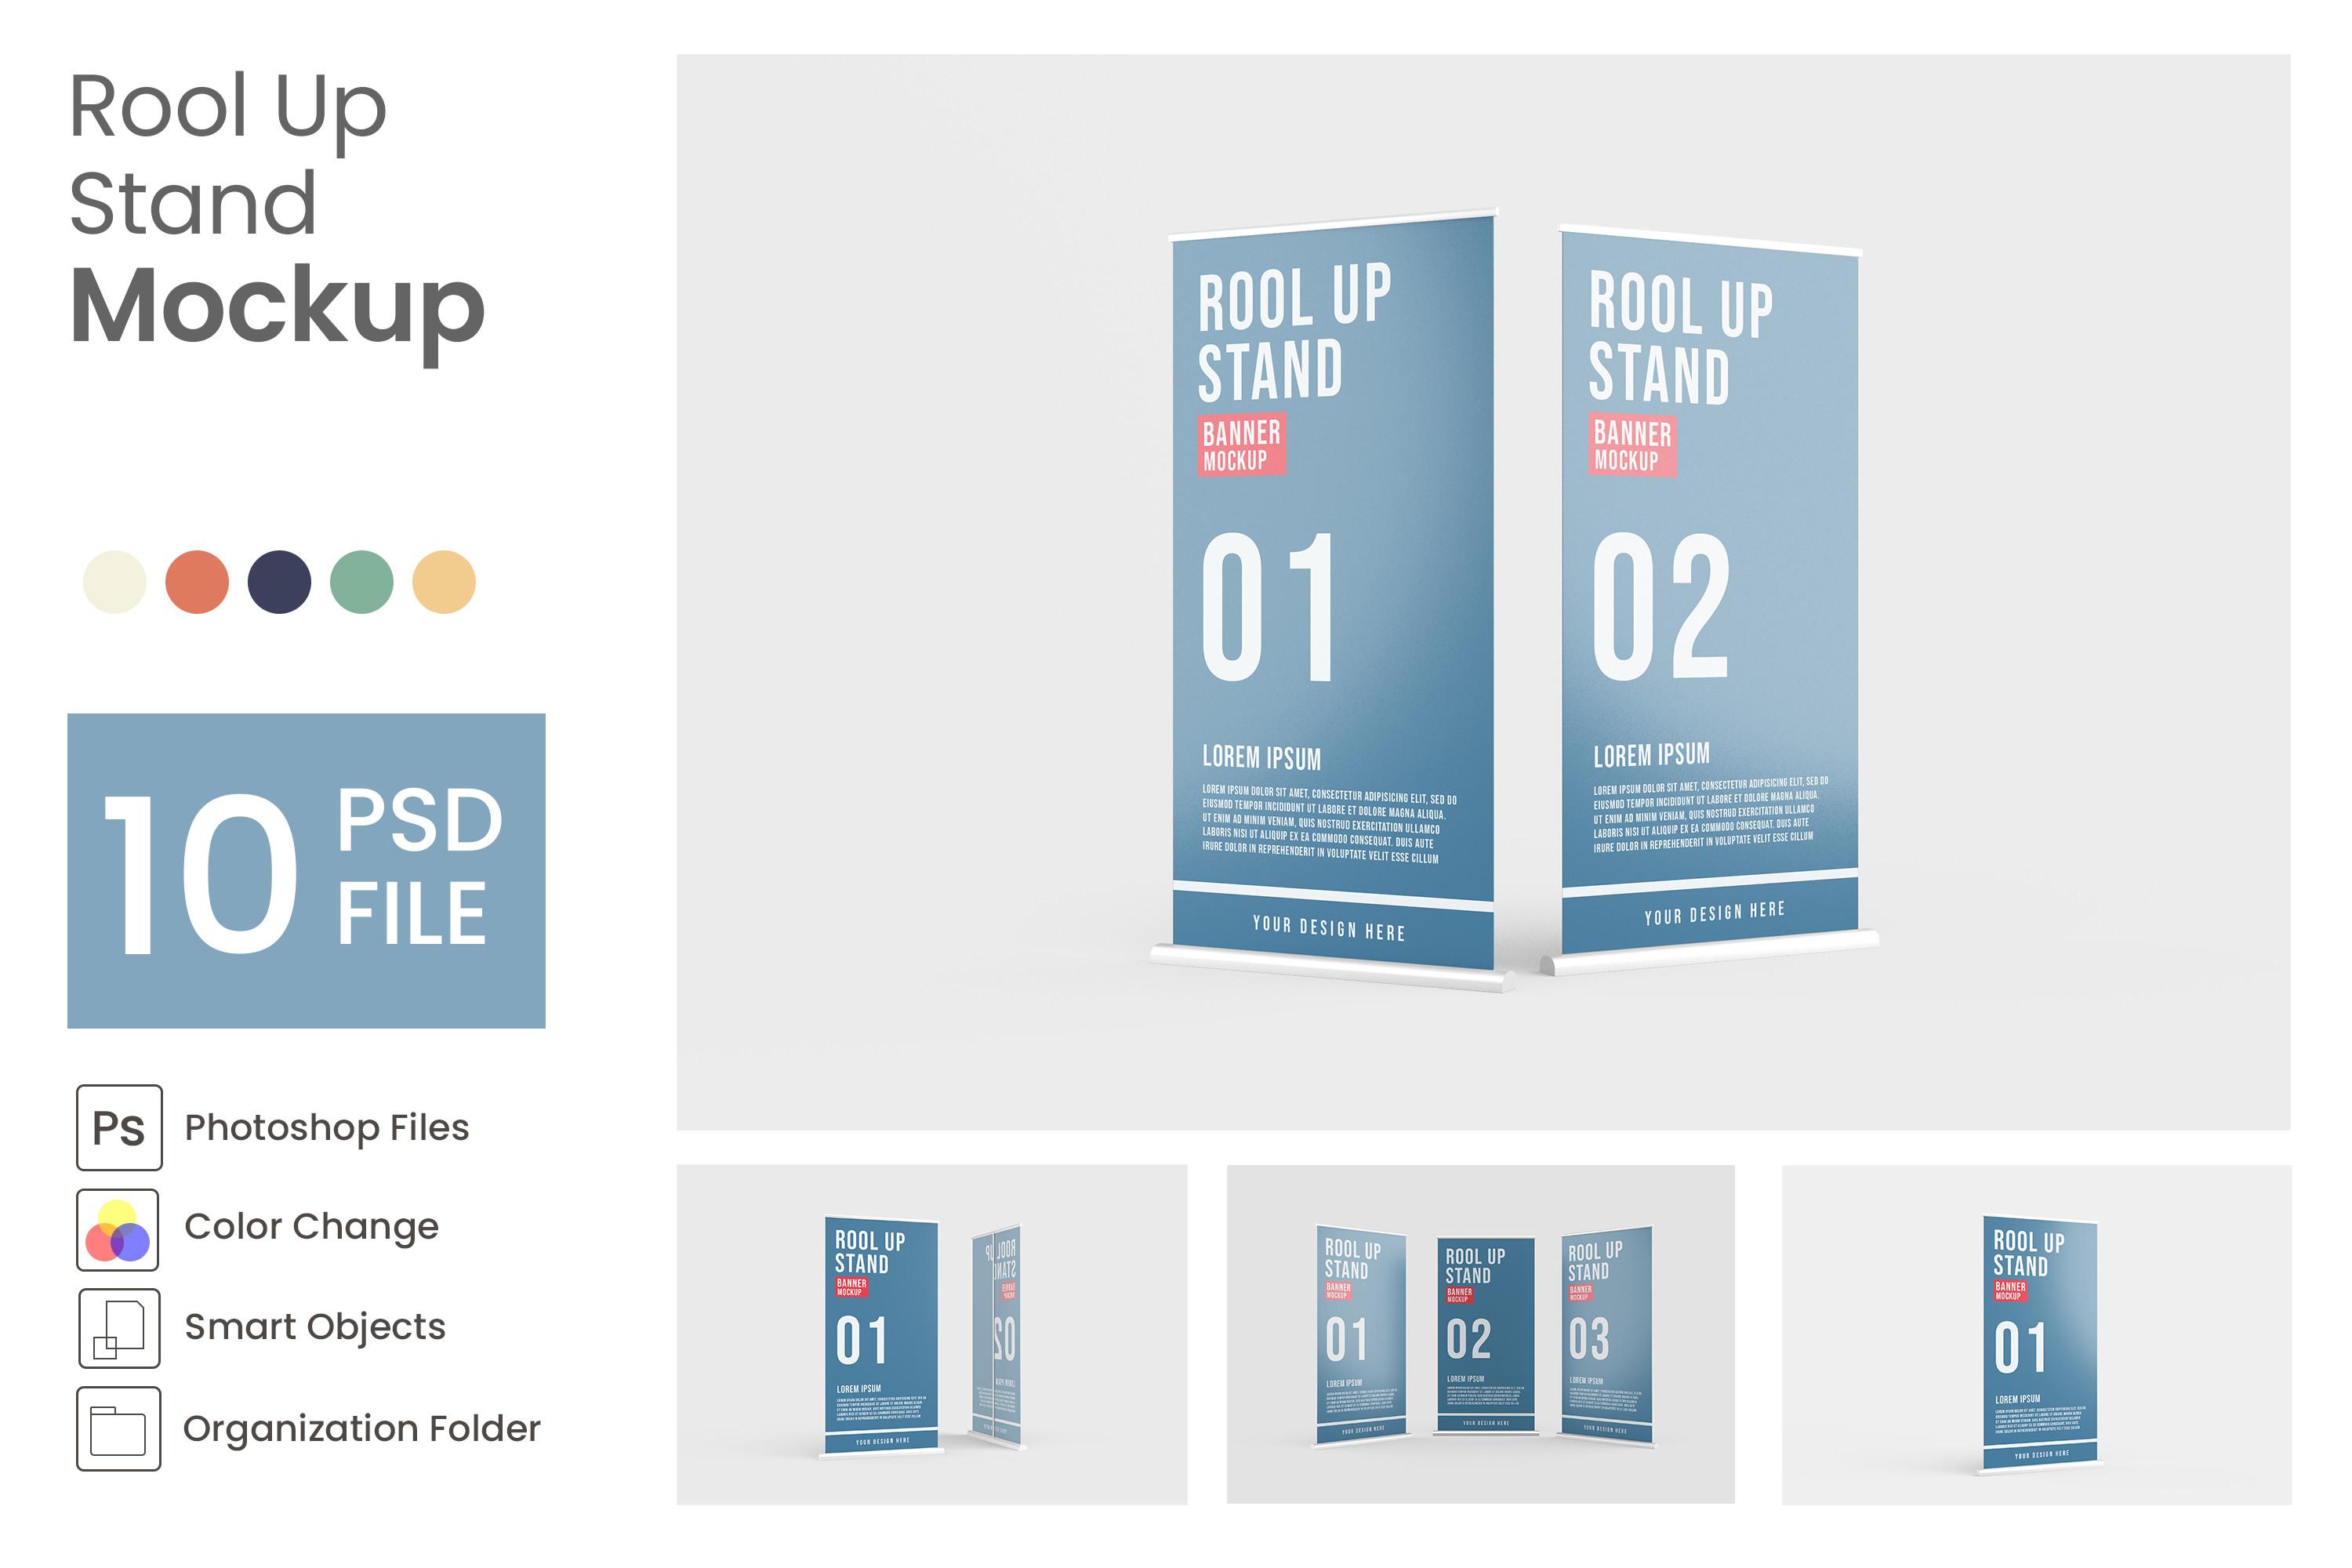 Rool Up Stand Mockup